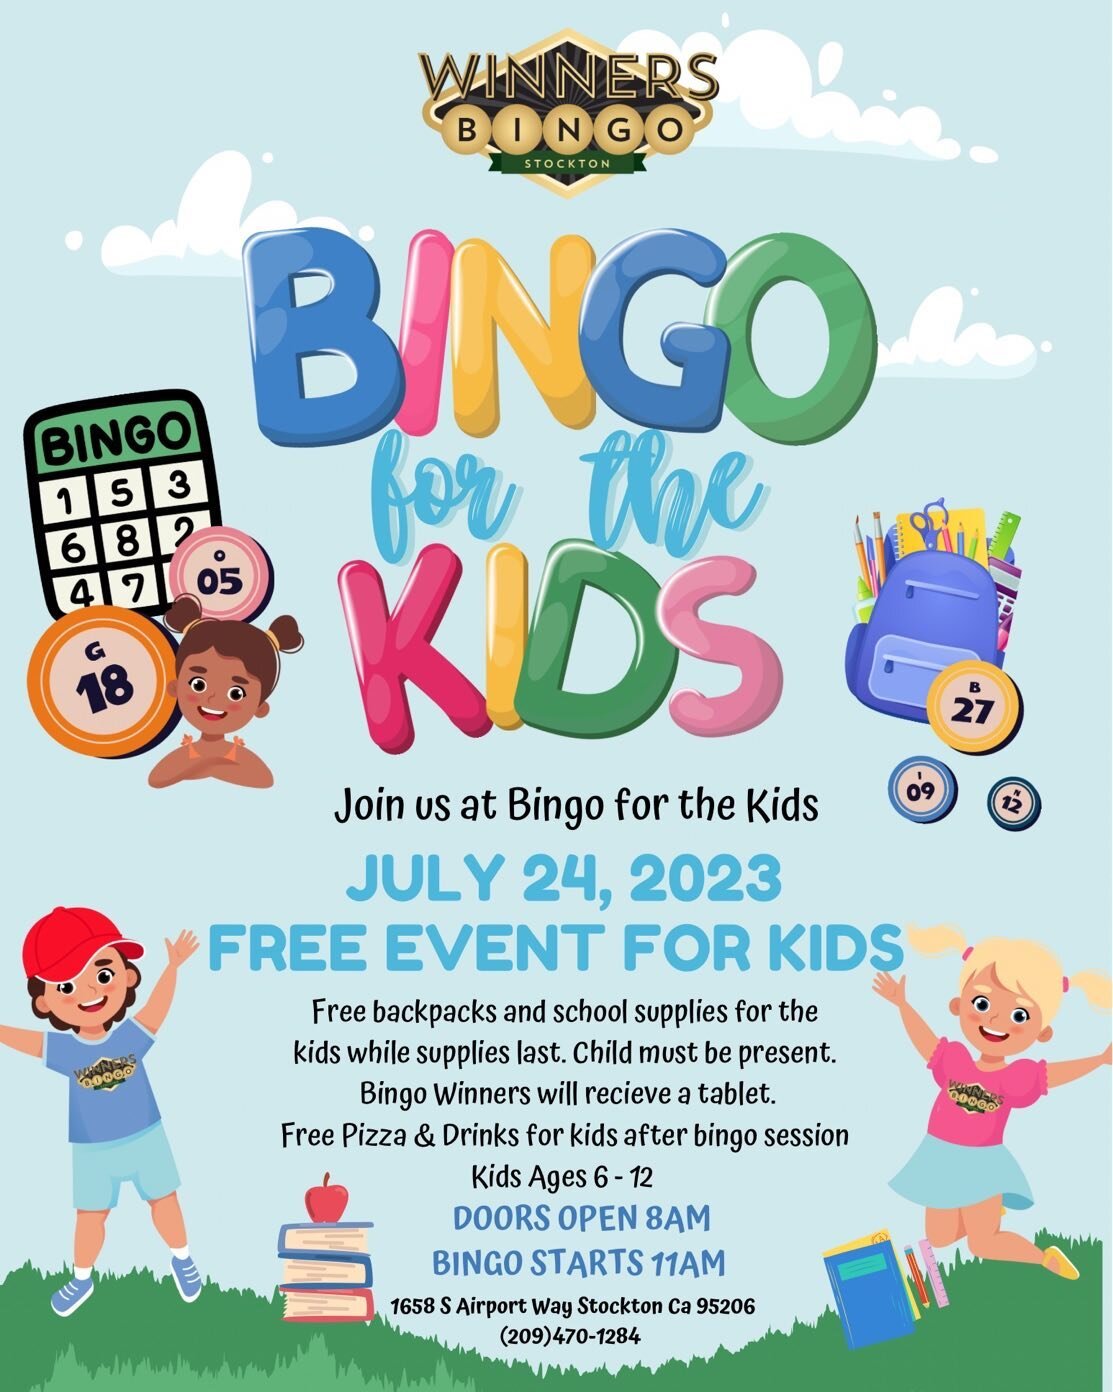 Bring the kids out to our annual bingo 4 kids event July 24th open at 8 am start at 11am free backpack,school supplies,free pizza and drinks all free for the kids at winners bingo in Stockton